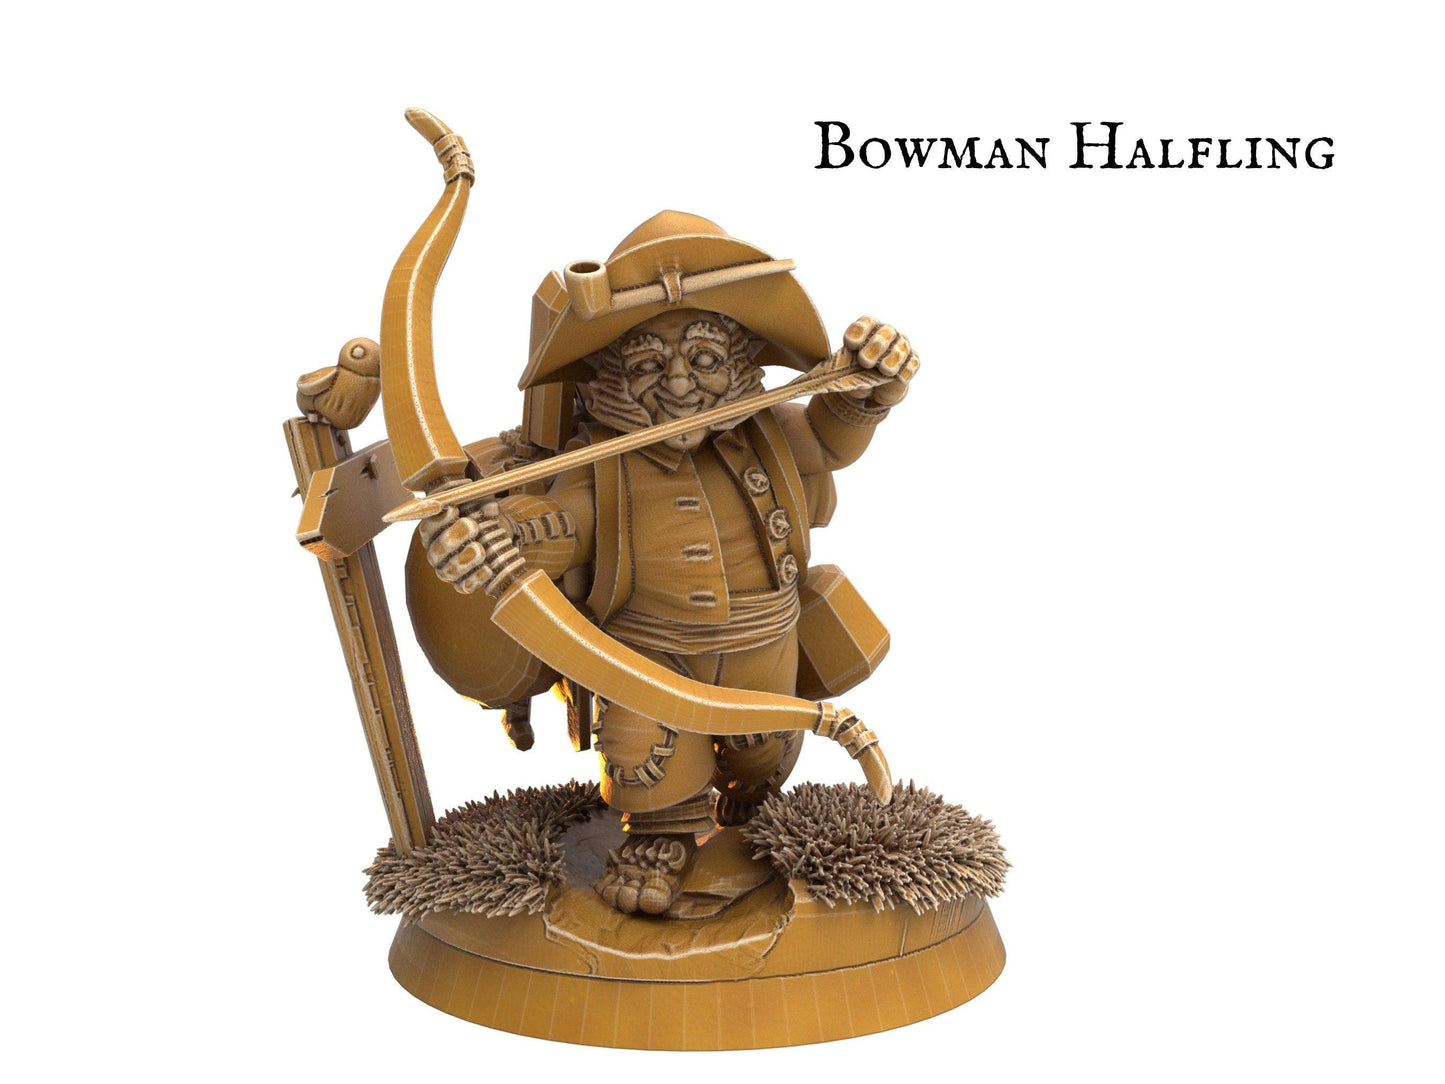 Male Halfling Miniature with spear - 8 Poses - 32mm scale Tabletop gaming DnD Miniature Dungeons and Dragons, dnd male halfling warrior - Plague Miniatures shop for DnD Miniatures